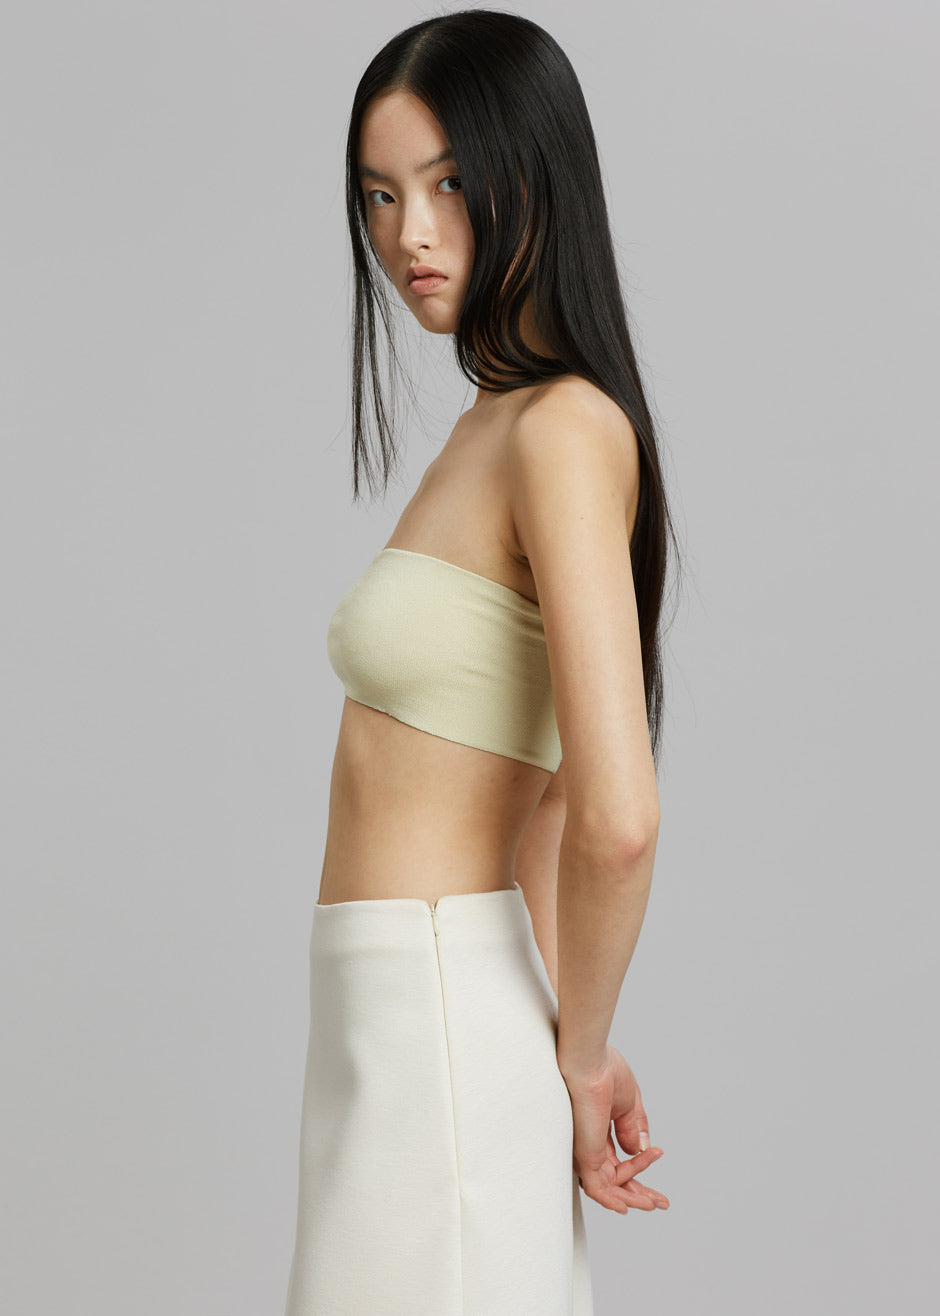 REMAIN Bailyn Tube Top - Putty Beige